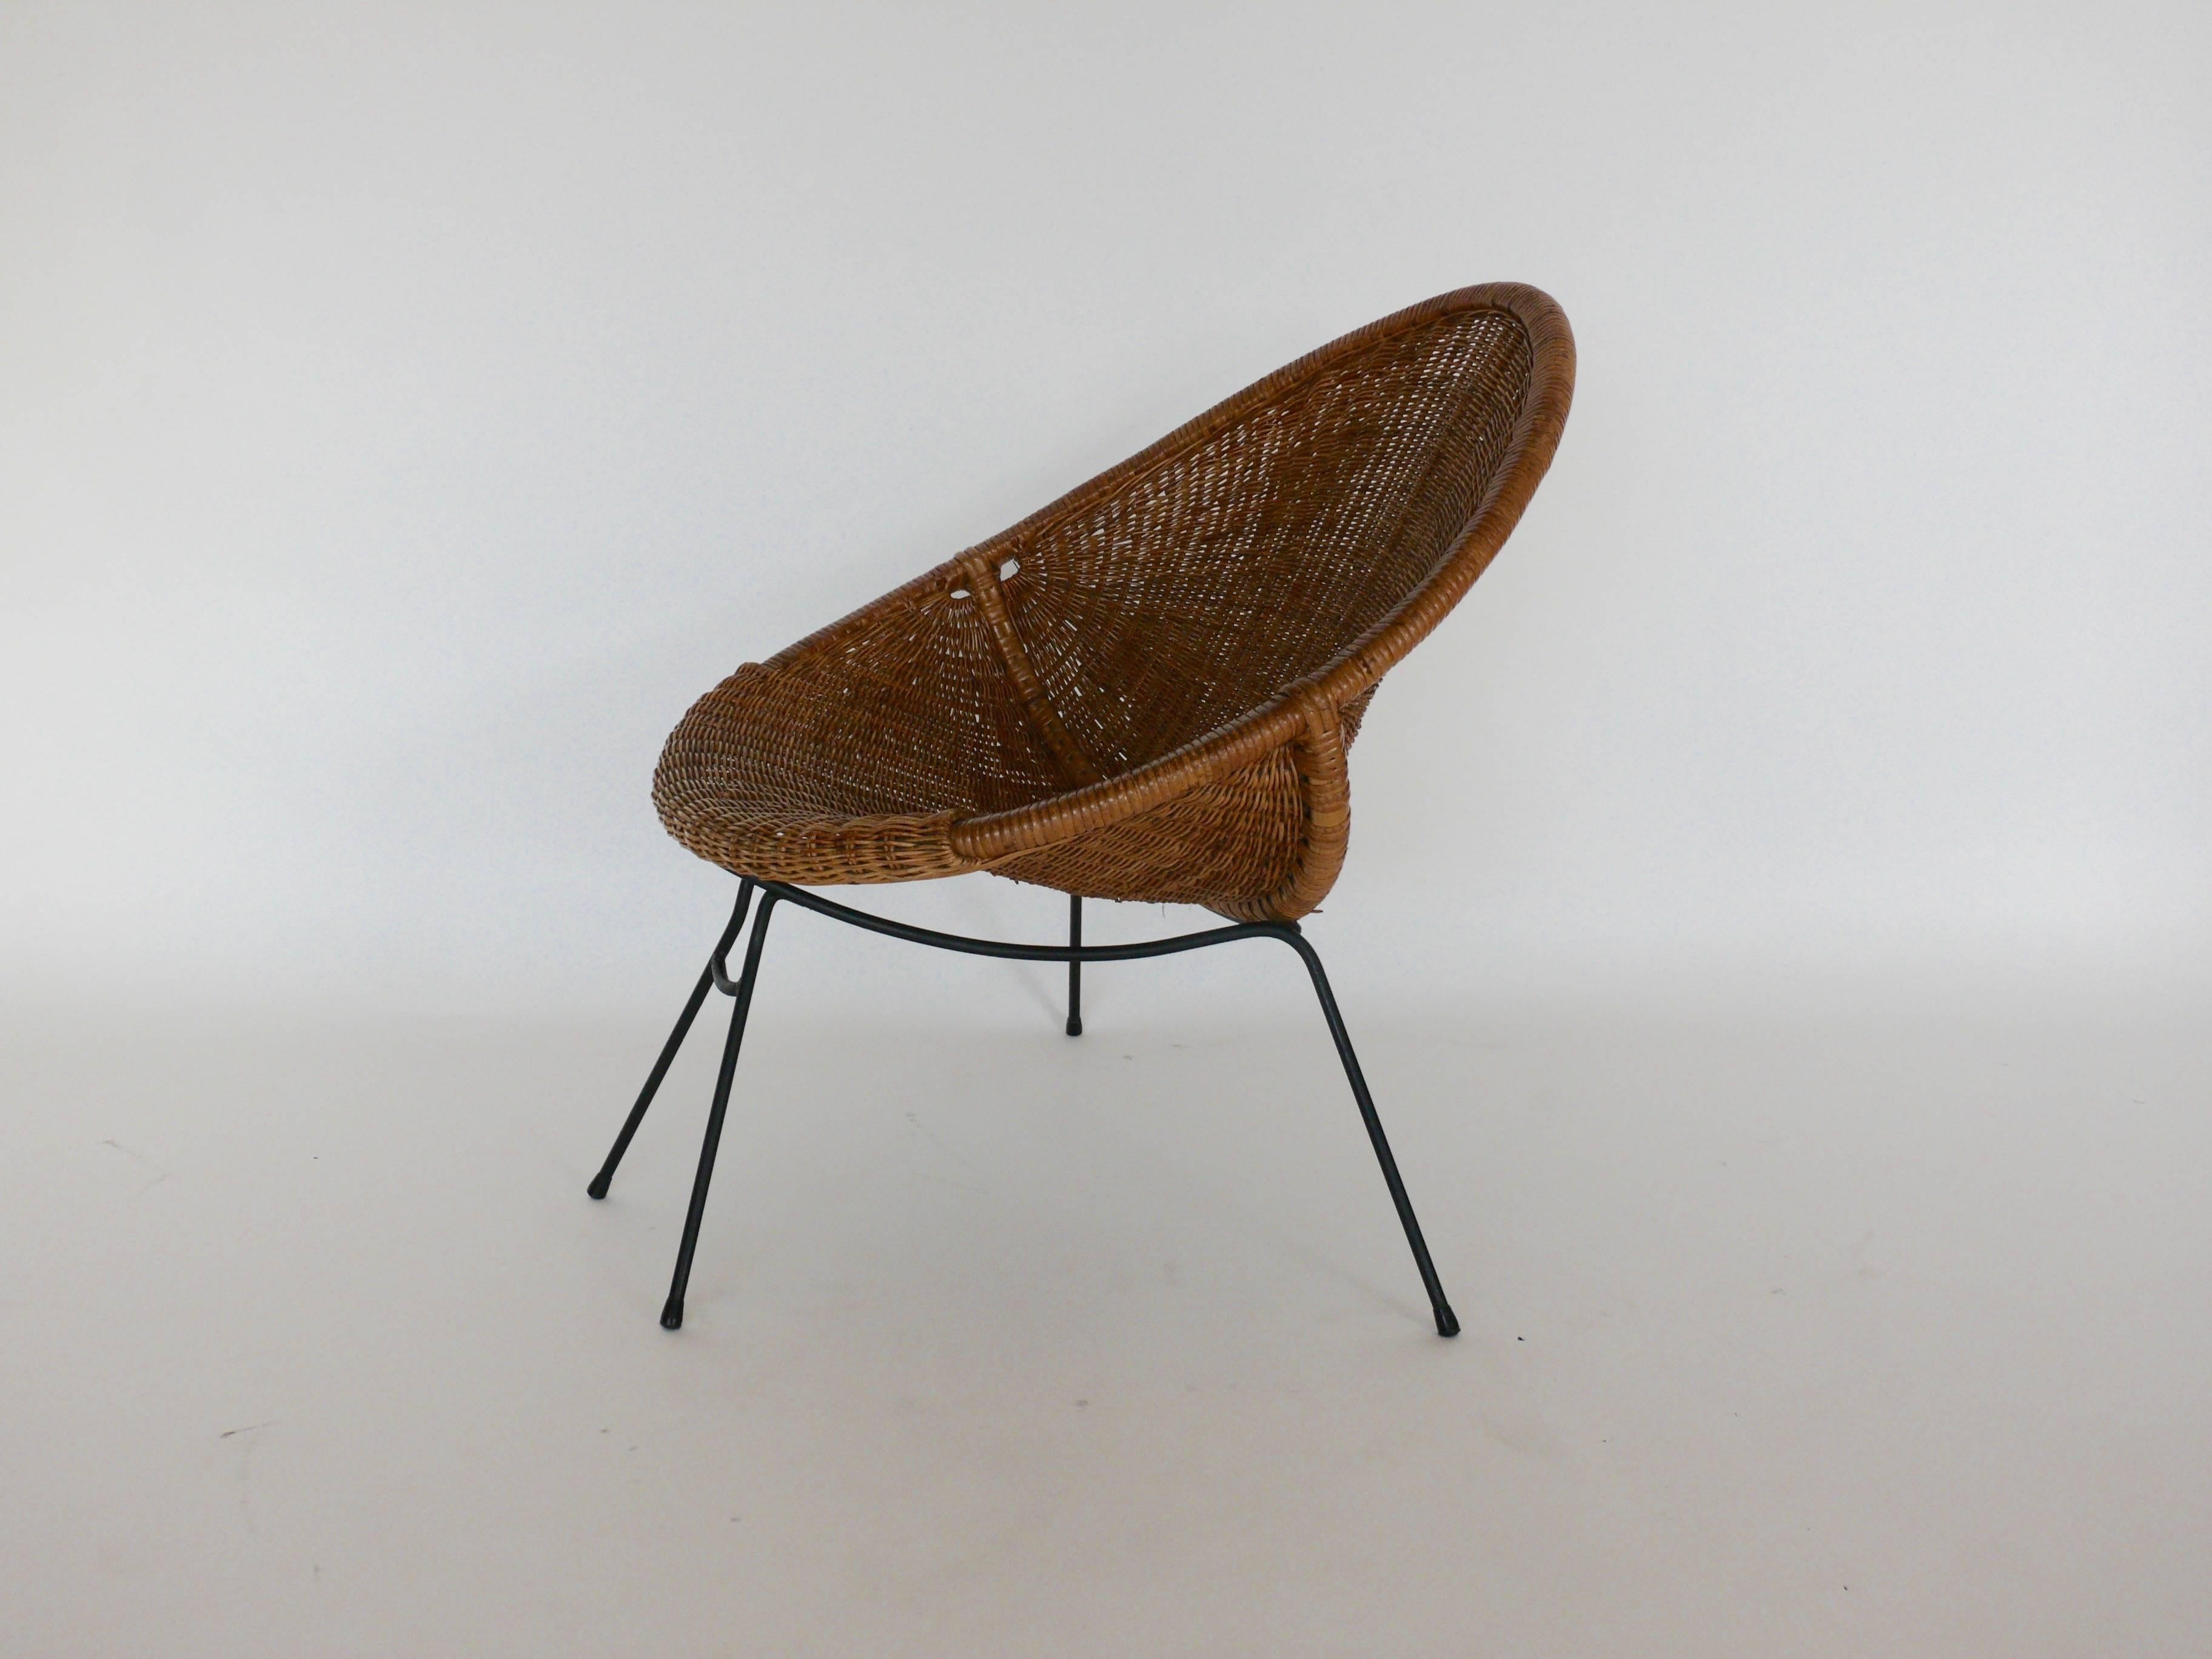 Fantastic Italian sculptural wicker scoop chair. Low profile chair has an iron frame with a unique shape. Excellent vintage condition. 